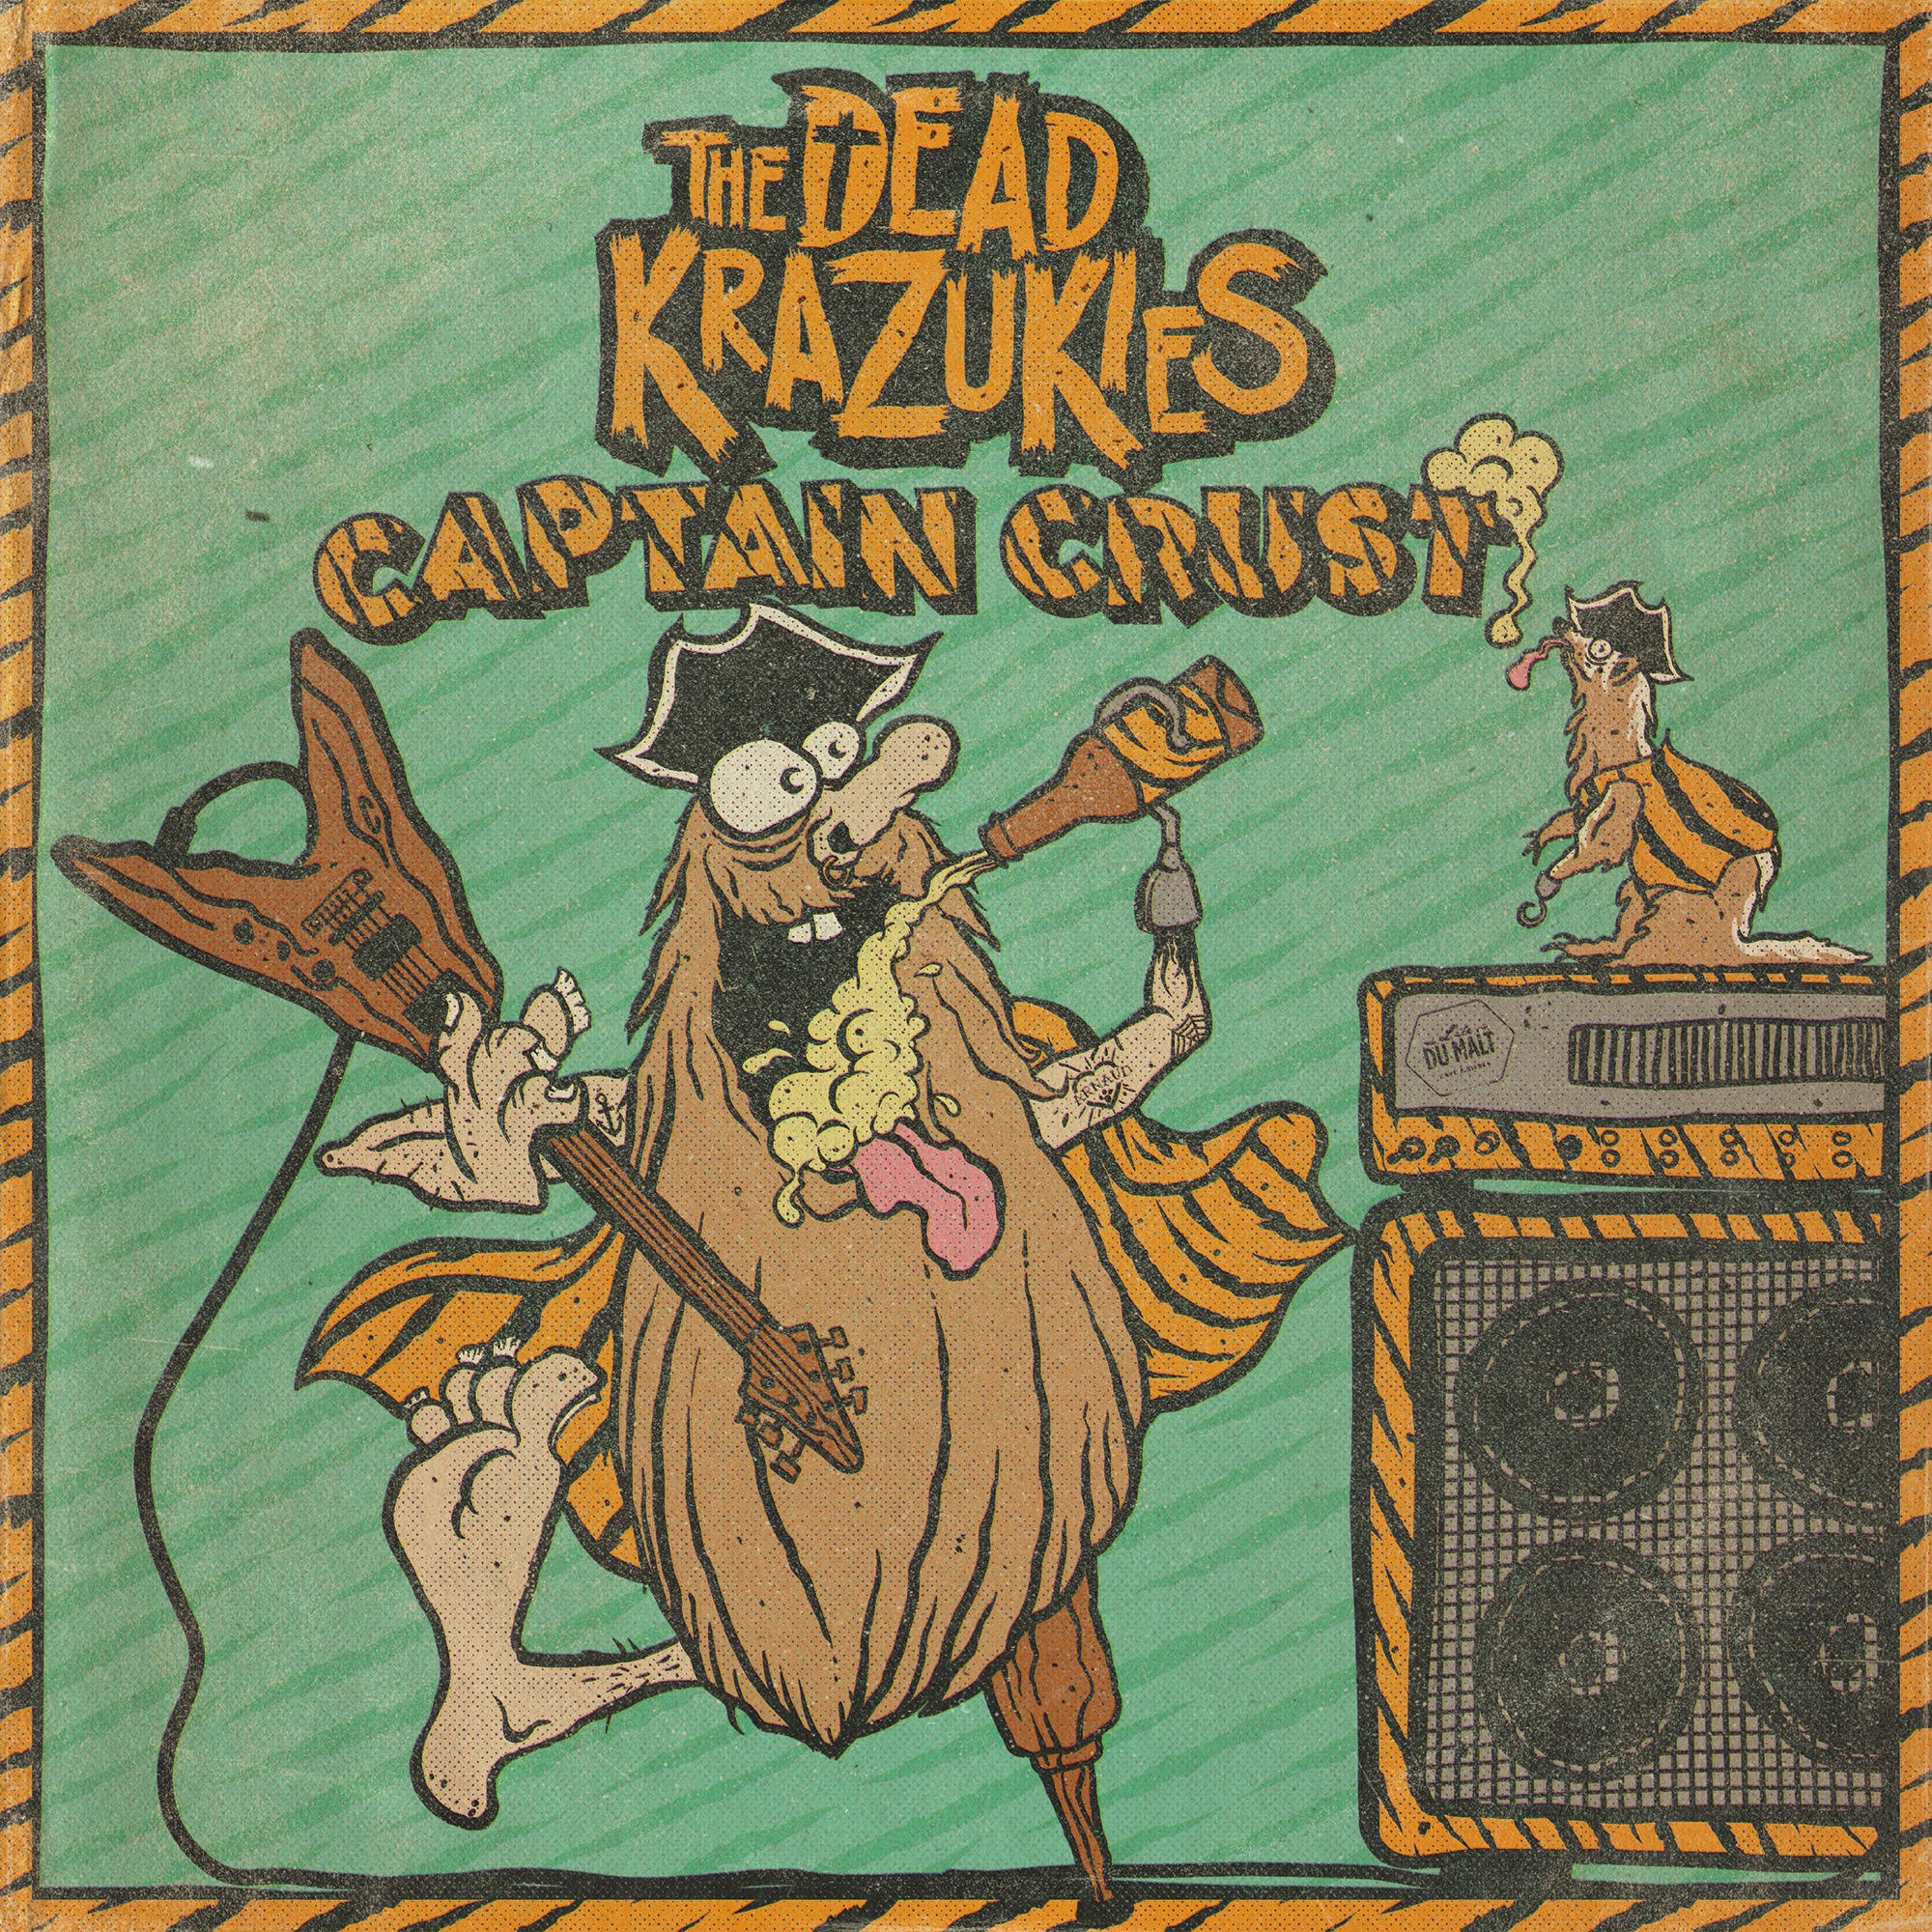 HOT TRACK: “Captain Crust” by The Dead Krazukies